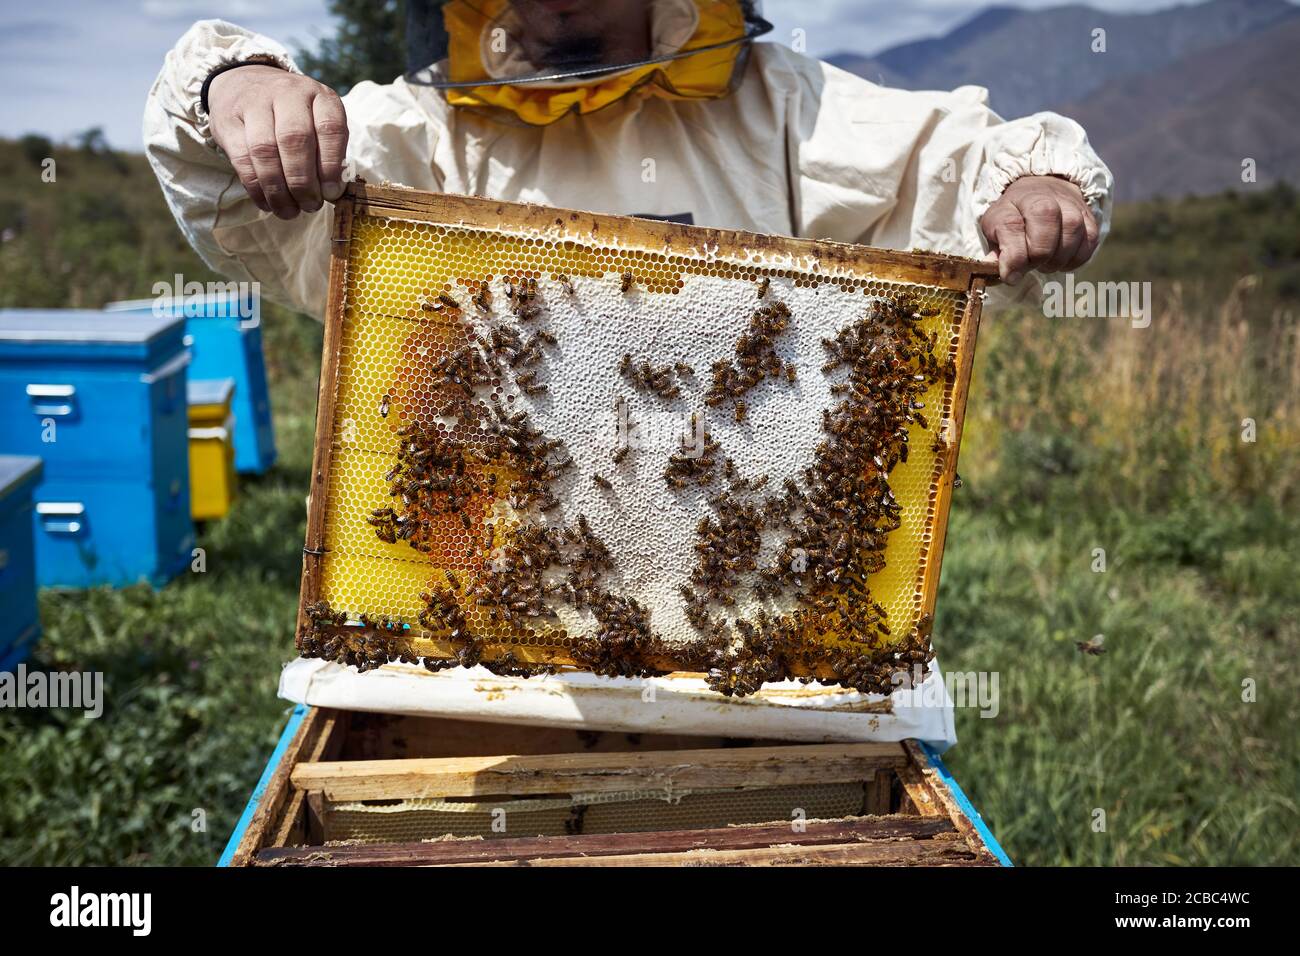 Beekeeper in protect costume is holding a hive frame at the apiary in the mountains Stock Photo